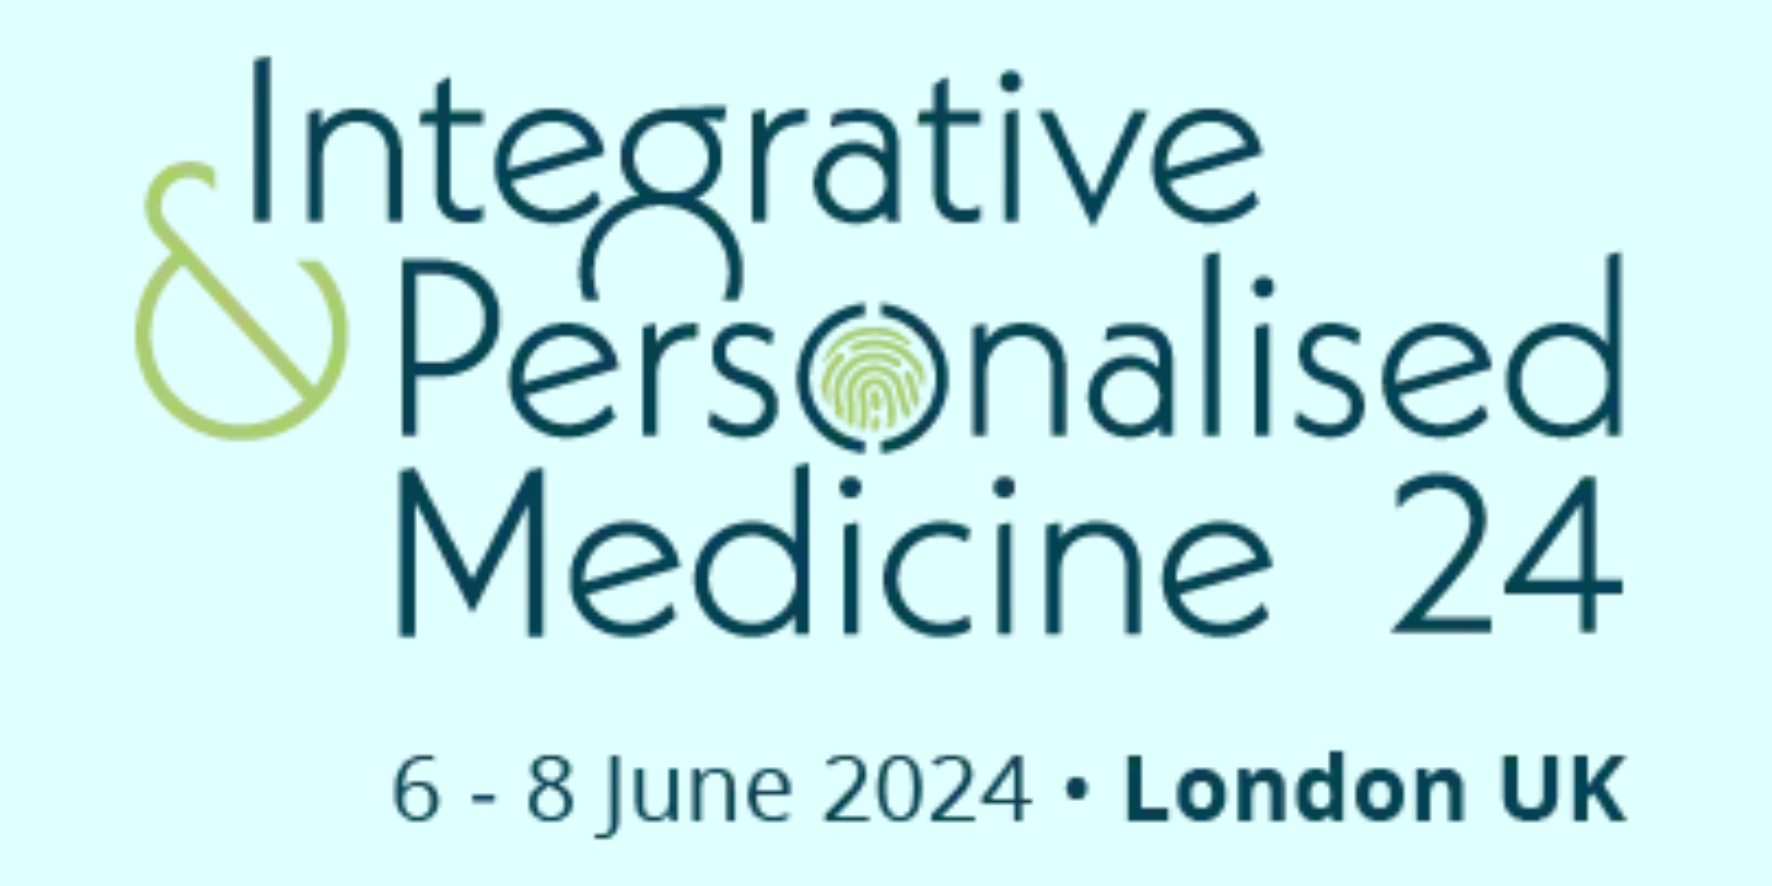 The Integrative and Personalised Medicine Congress 2024